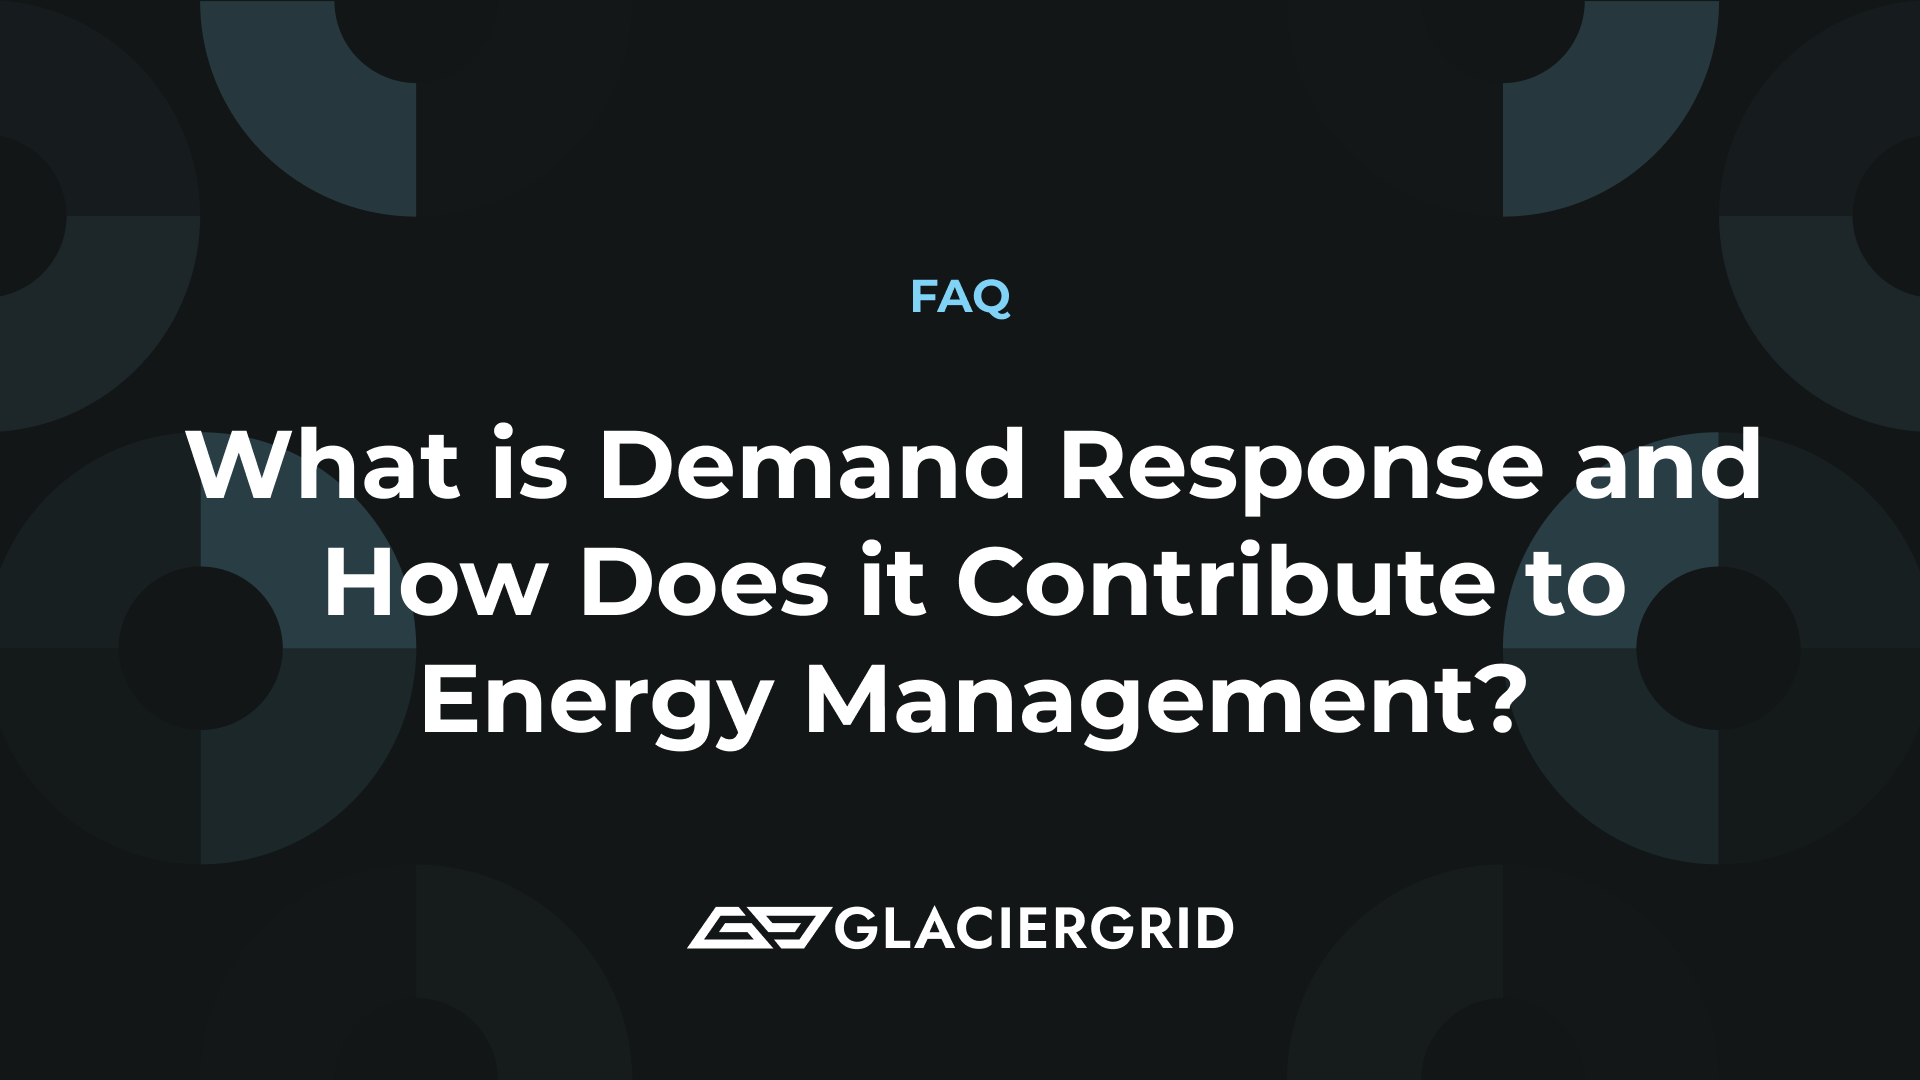 What is Demand Response and how does it contribute to energy management?